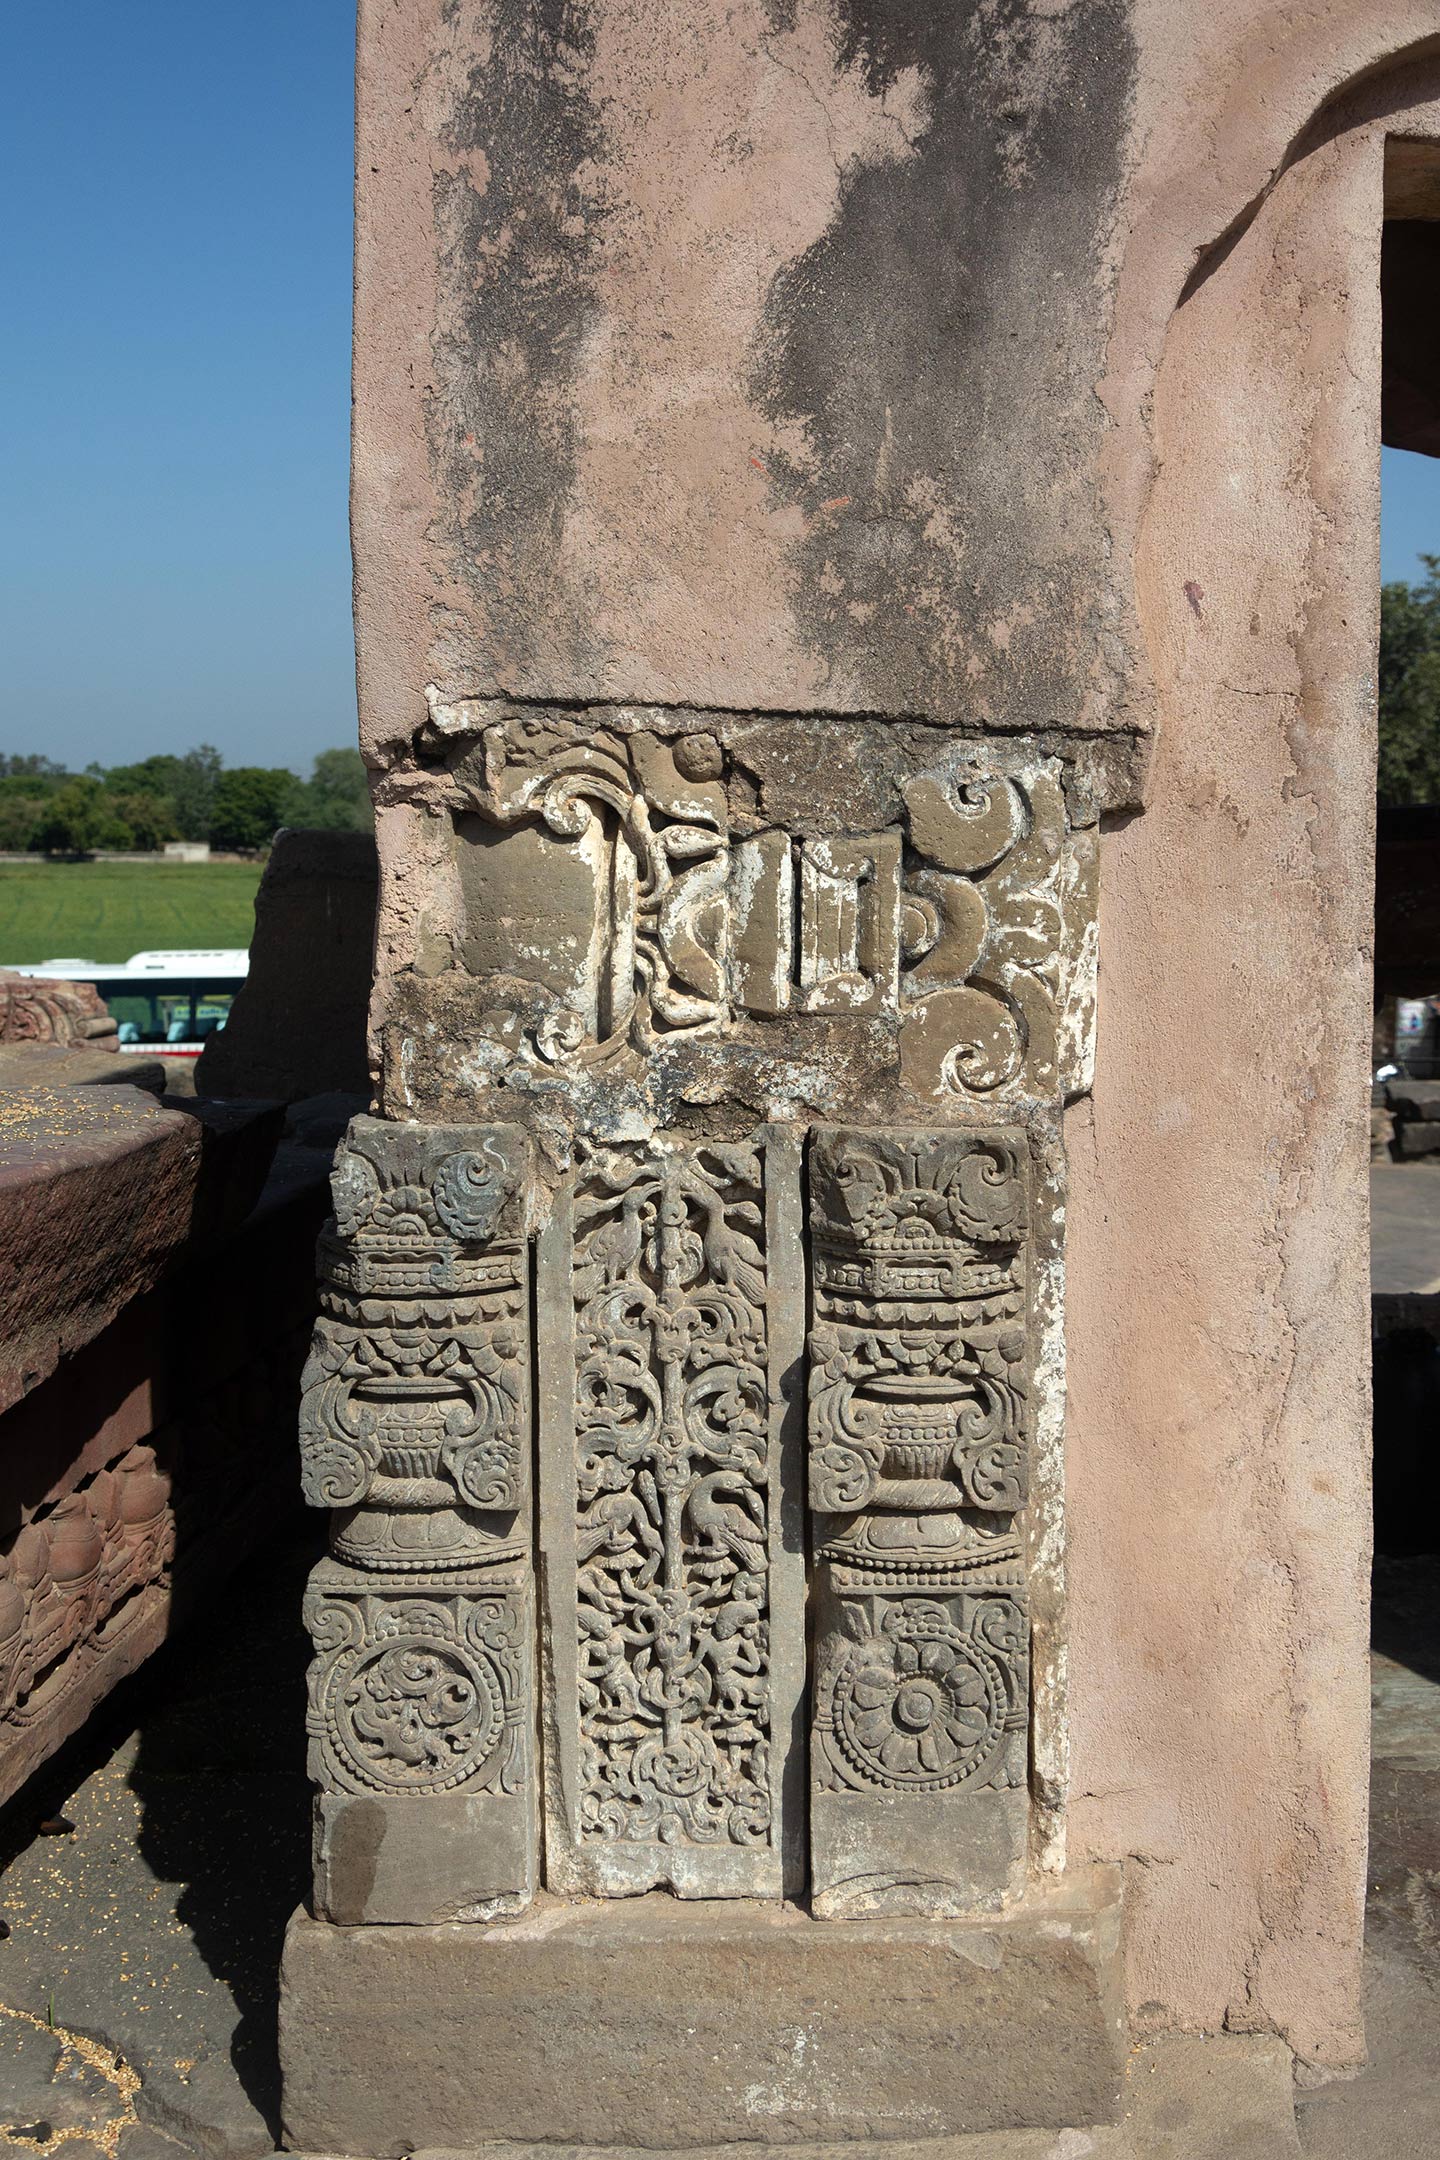 The stone is broken and has three vertical sections. The section on the left has a purna kalasha (overflowing pot of prosperity) motif on the upper half and a makara (hybrid sea creature) inside a circular medallion at the bottom half. The mid-section has an intricate carving of kalpa vrisksha (tree of life) motif with figures of birds and kinnaras (hybrid human-bird creatures) camouflaged within the foliage. The section on the right has a purna kalasha motif on the top half and an eight-petal lotus blooming inside a circular medallion at the bottom half.